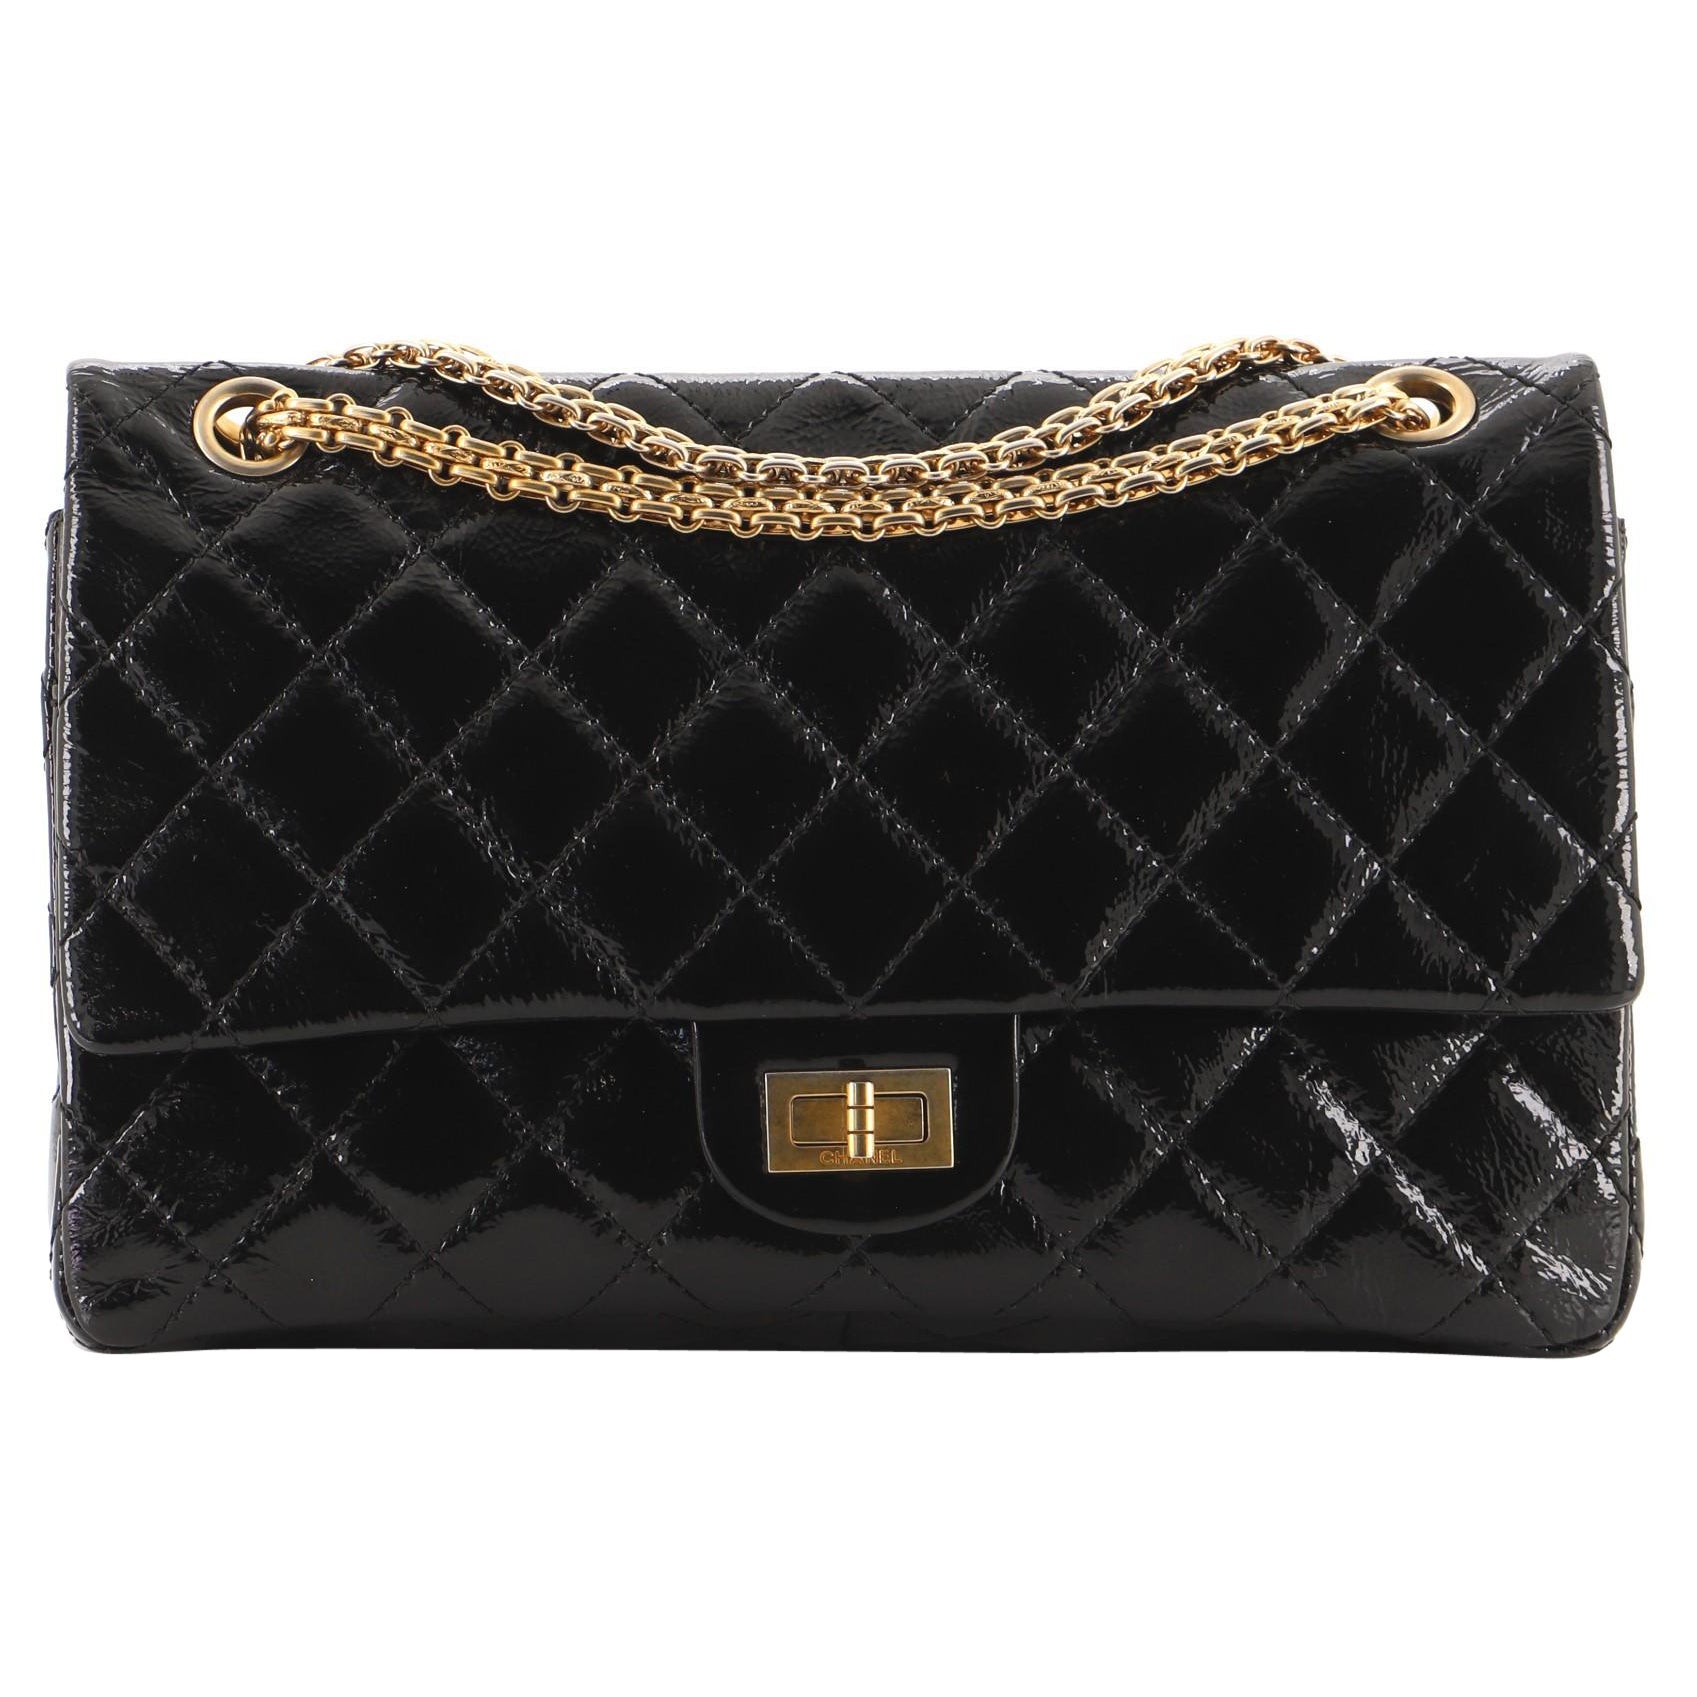 Chanel Reissue 2.55 Flap Bag Quilted Crinkled Patent 226